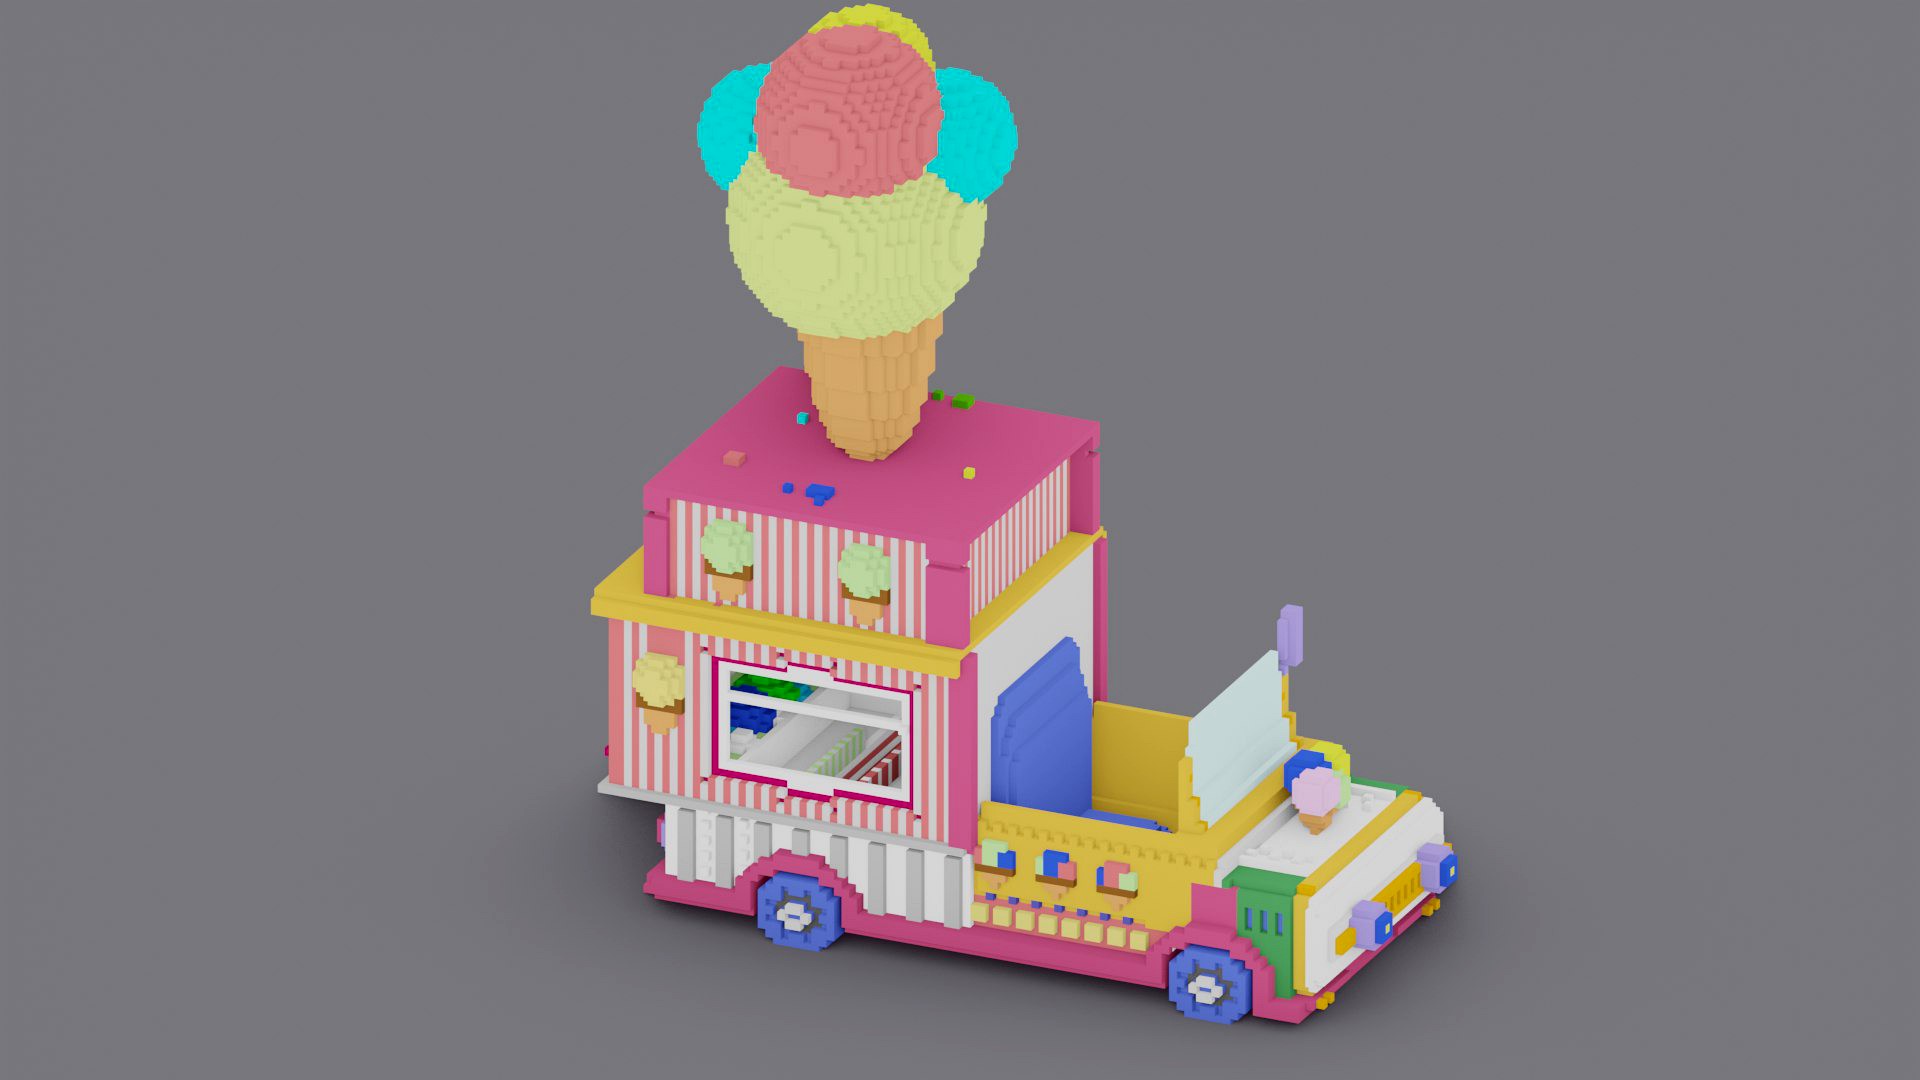 Ice cream truck low poly toy 8 bit style